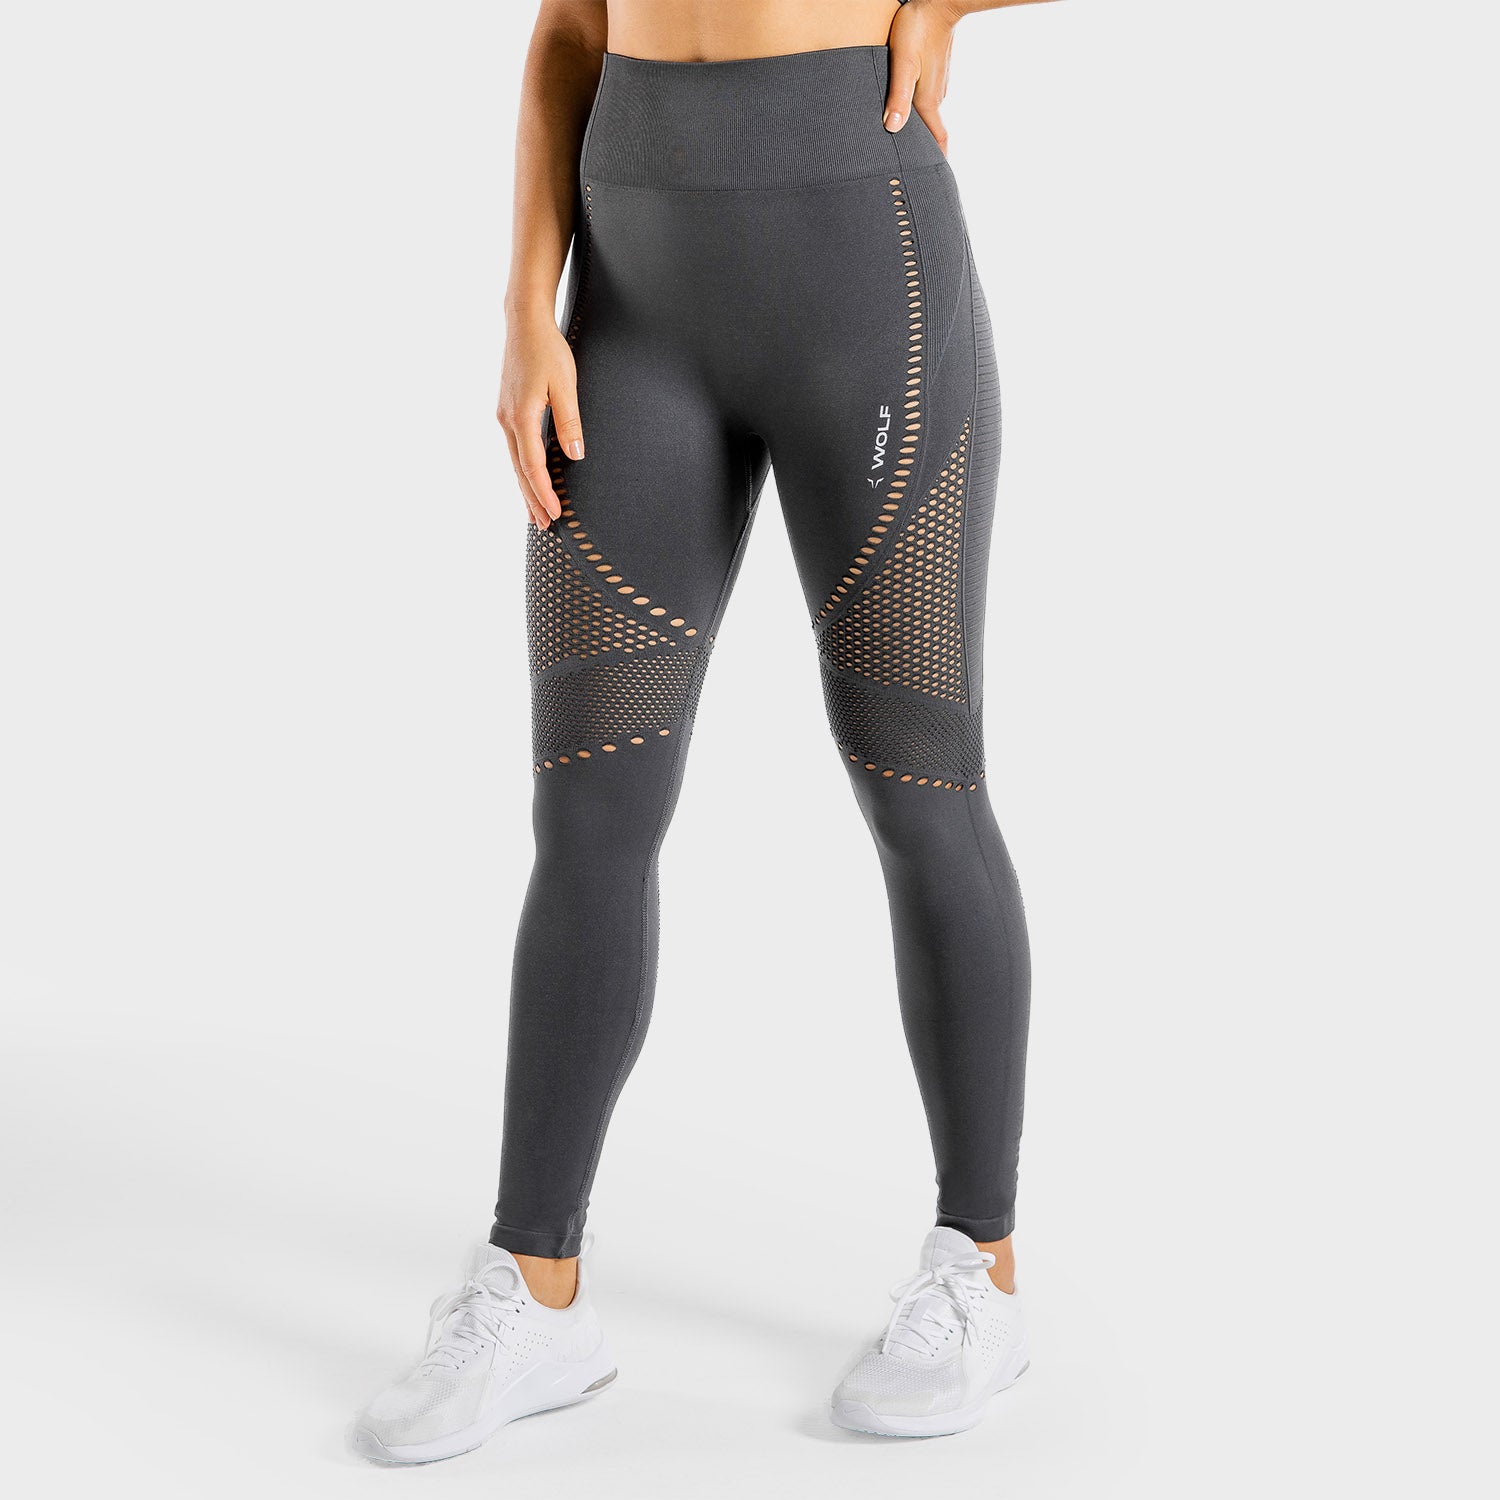 squatwolf-gym-leggings-for-women-meta-seamless-leggings-charcoal-workout-clothes